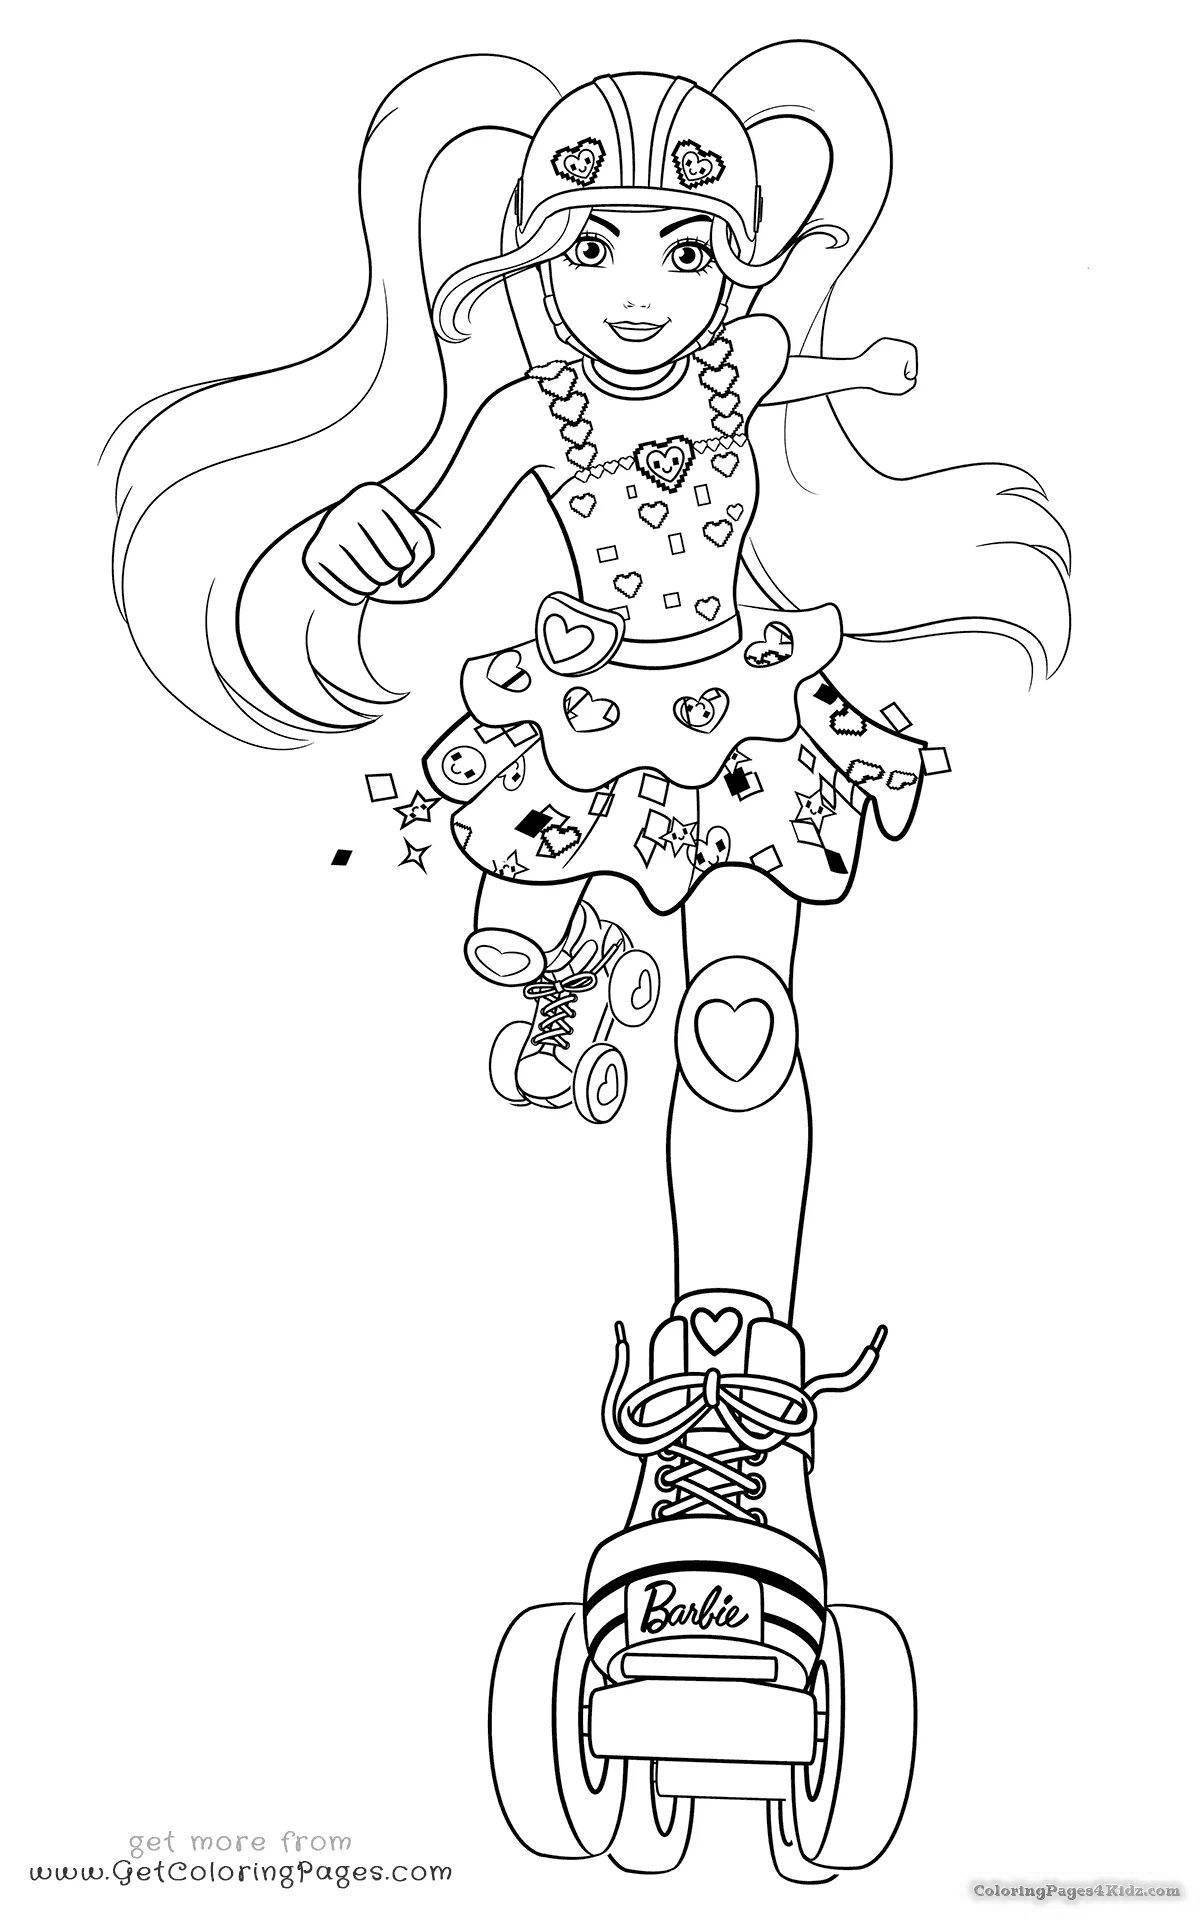 Chelsea adorable doll coloring page